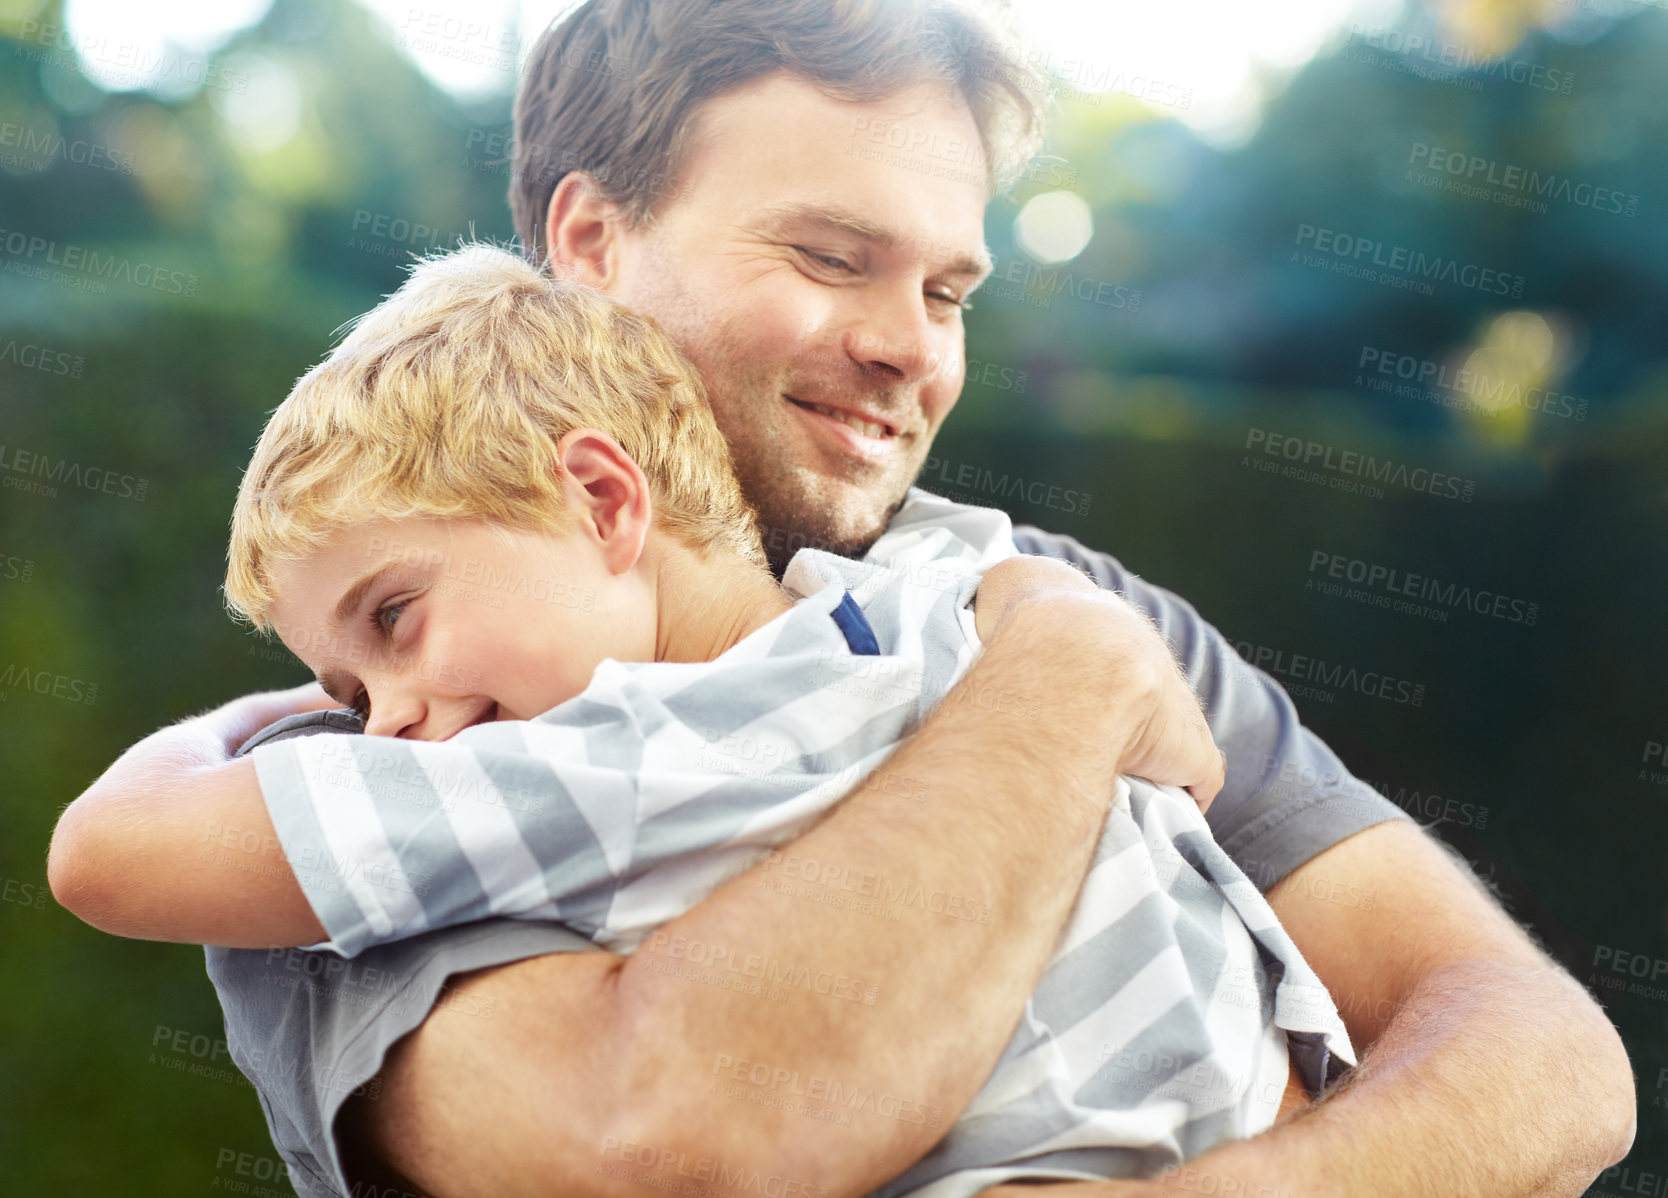 Buy stock photo Shot of a smiling father hugging his son outside